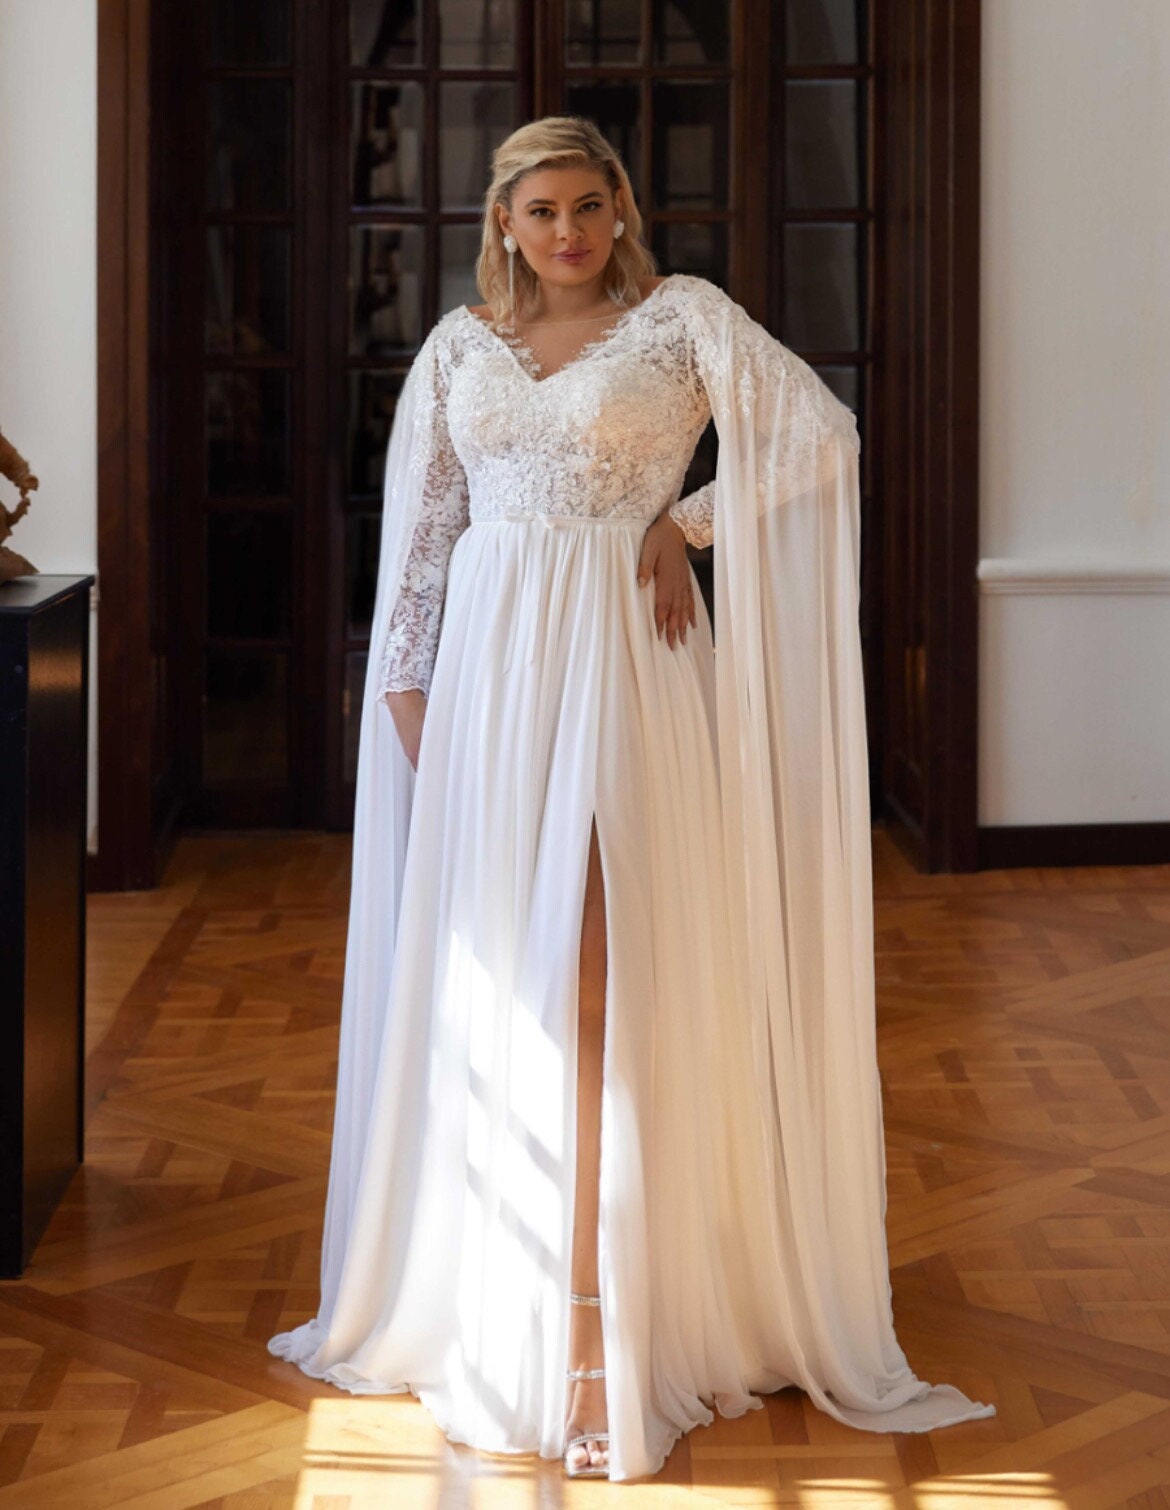 Plus Size Boho Wedding Dress With Long Wide Sleeves, V Neckline, Tulle  Skirt, ALL SIZES, Curvy Bride Boho Wedding Dress, a Line Bridal Dress 